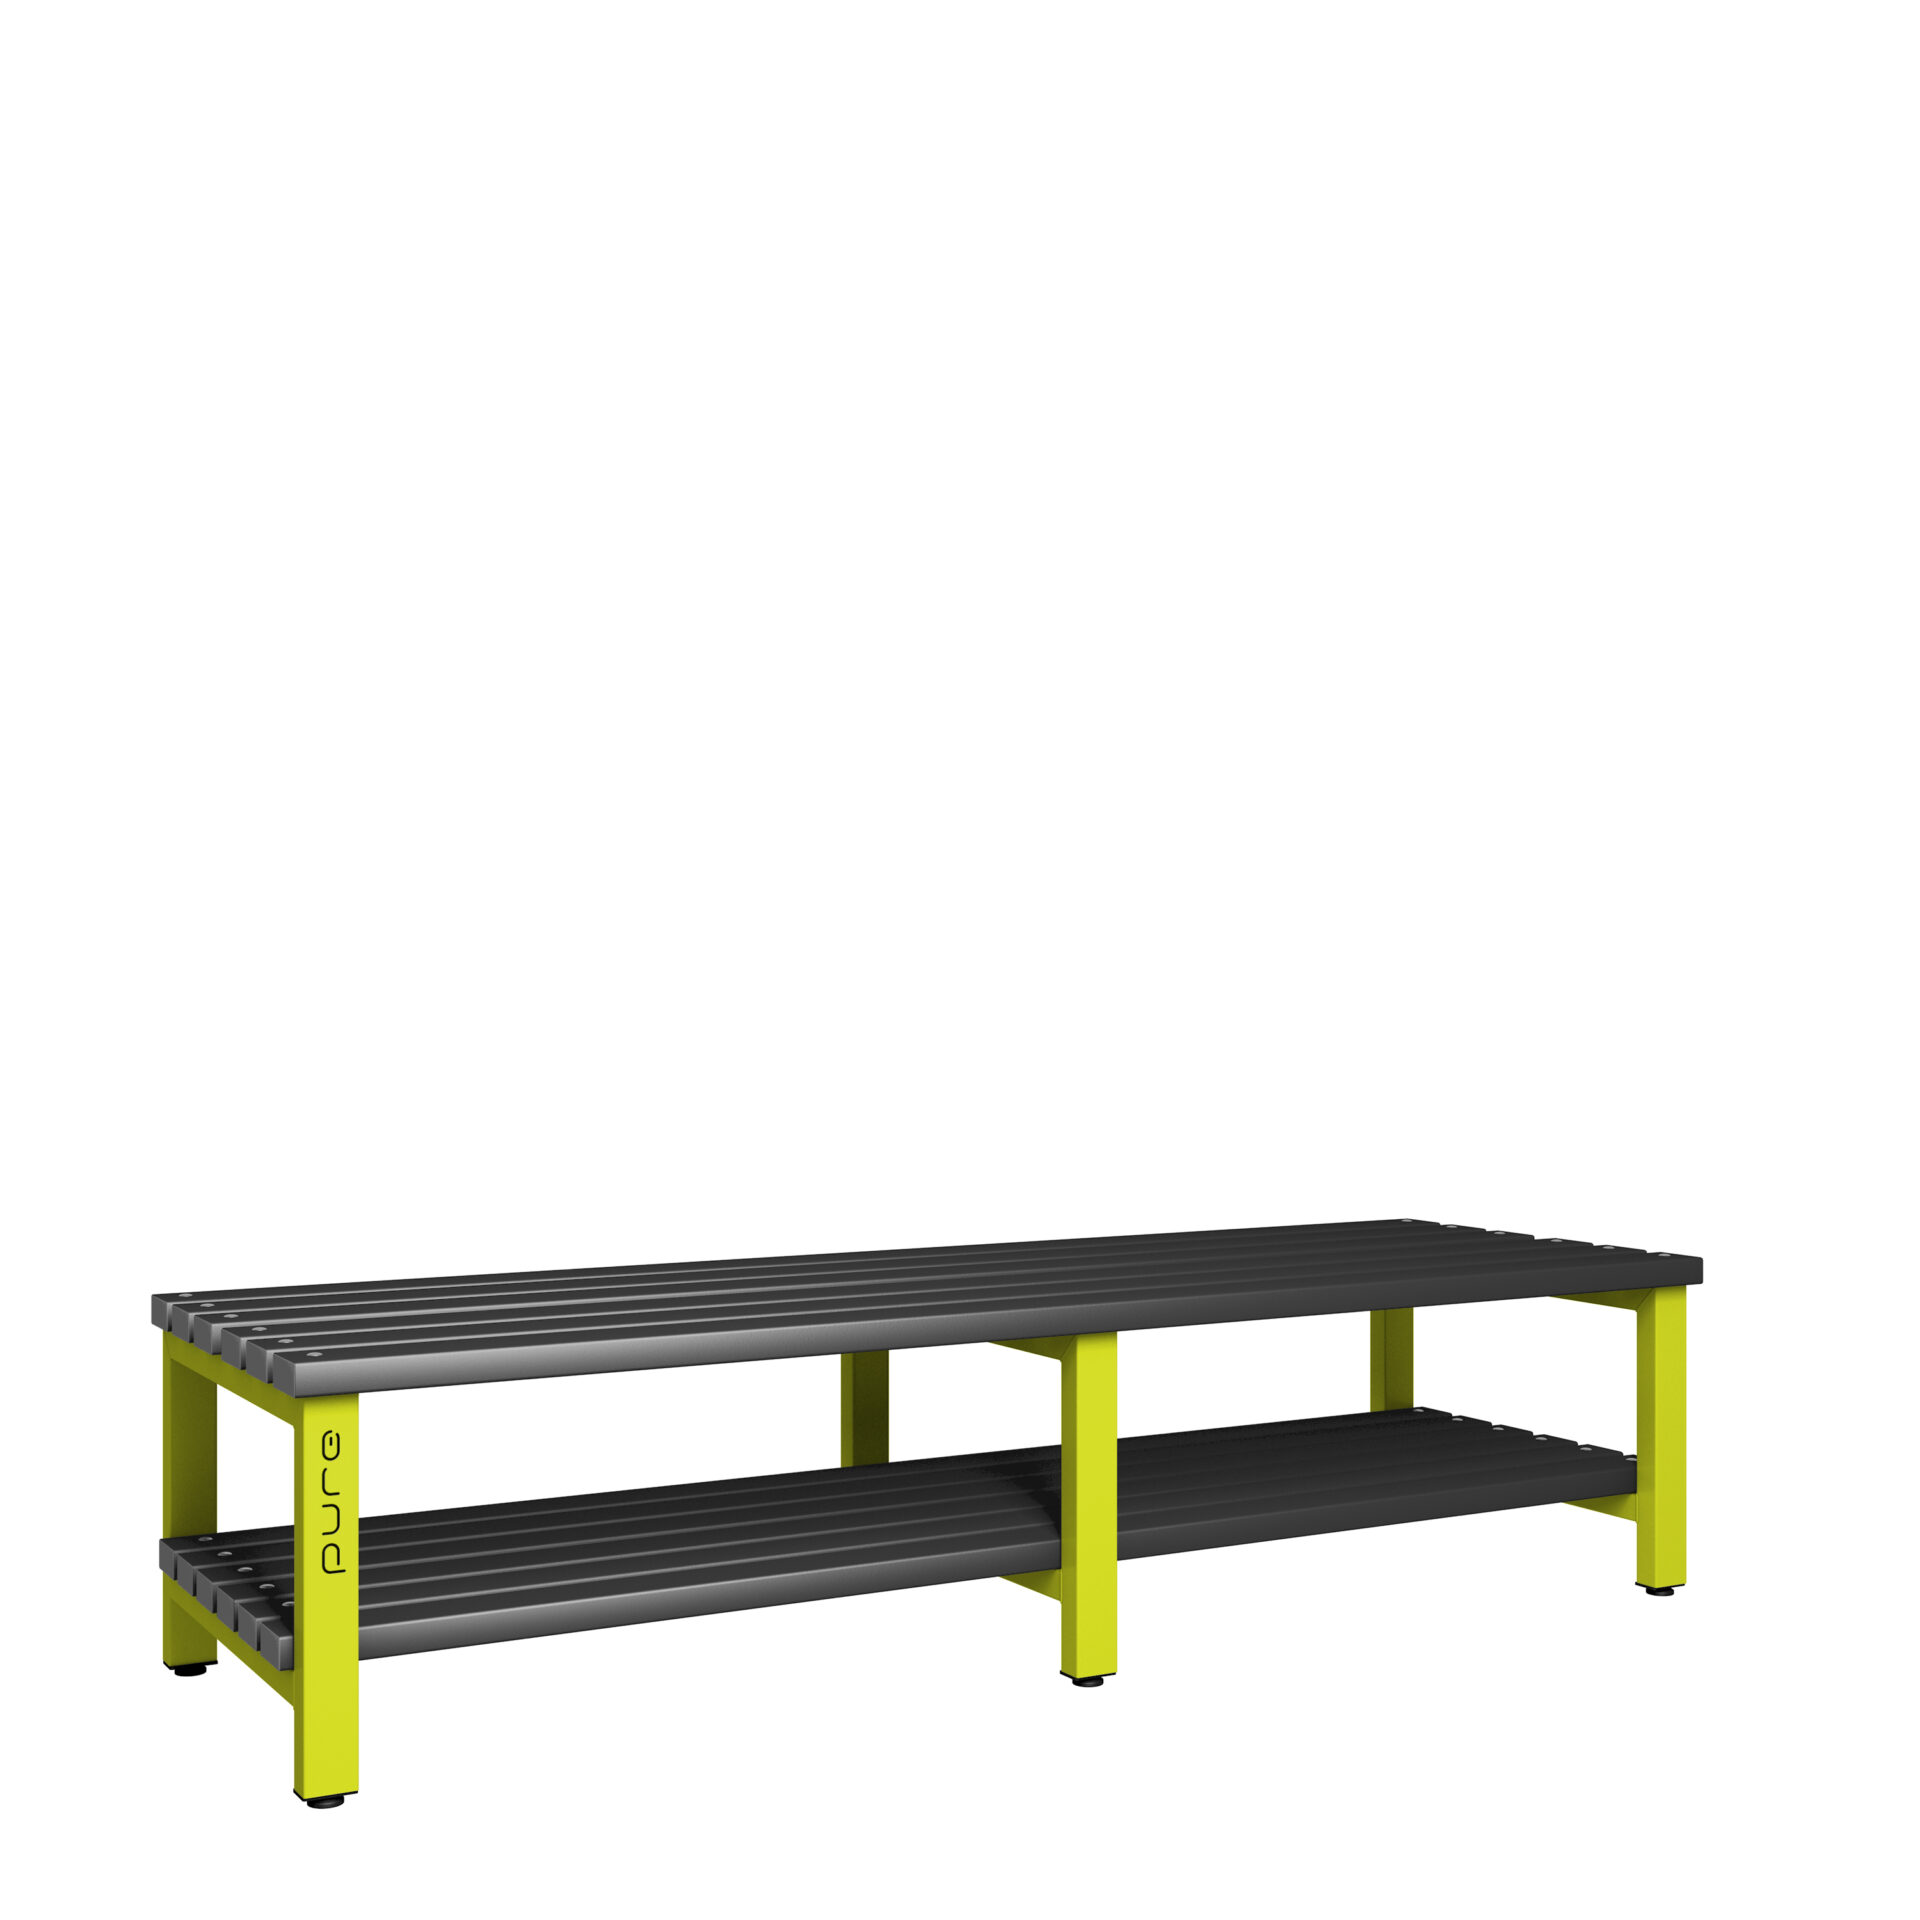 Pure Carbon Zero Double Sided 2000mm Standard Bench With Shoe Shelf